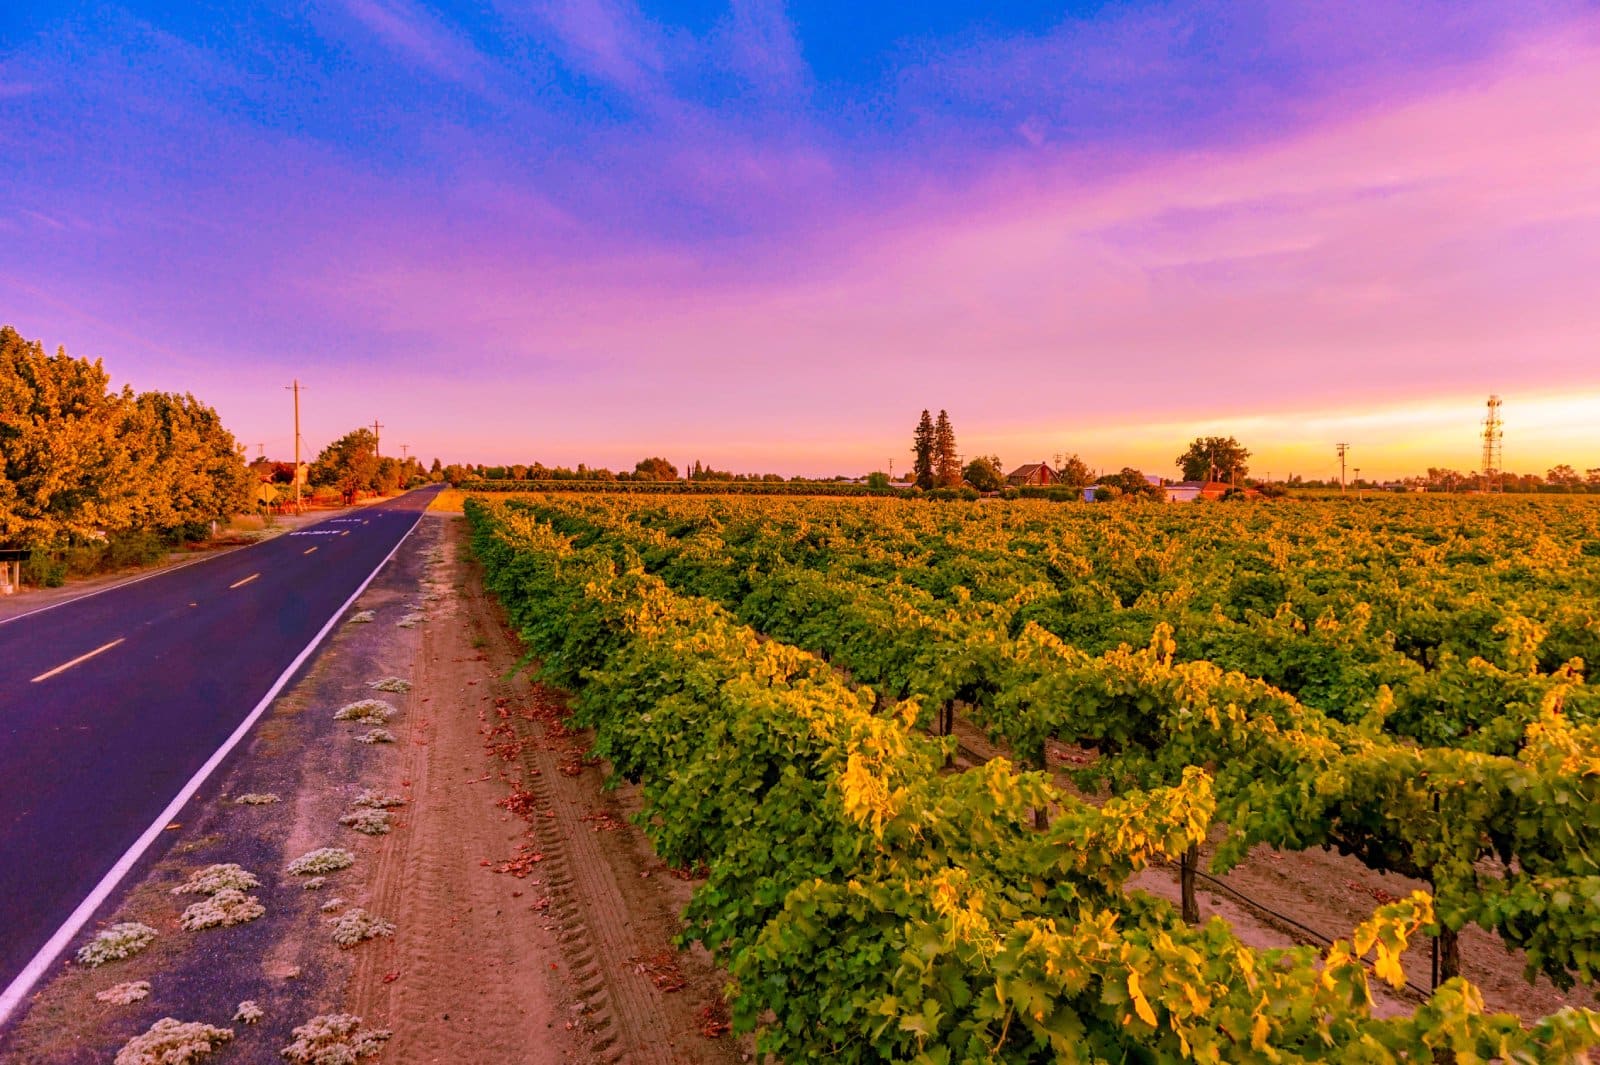 <p class="wp-caption-text">Image Credit: Shutterstock / Chantarat</p>  <p><span>Known as the Zinfandel Capital of the World, Lodi’s warm climate produces powerfully flavored wines, along with Spanish and Italian varietals.</span></p>